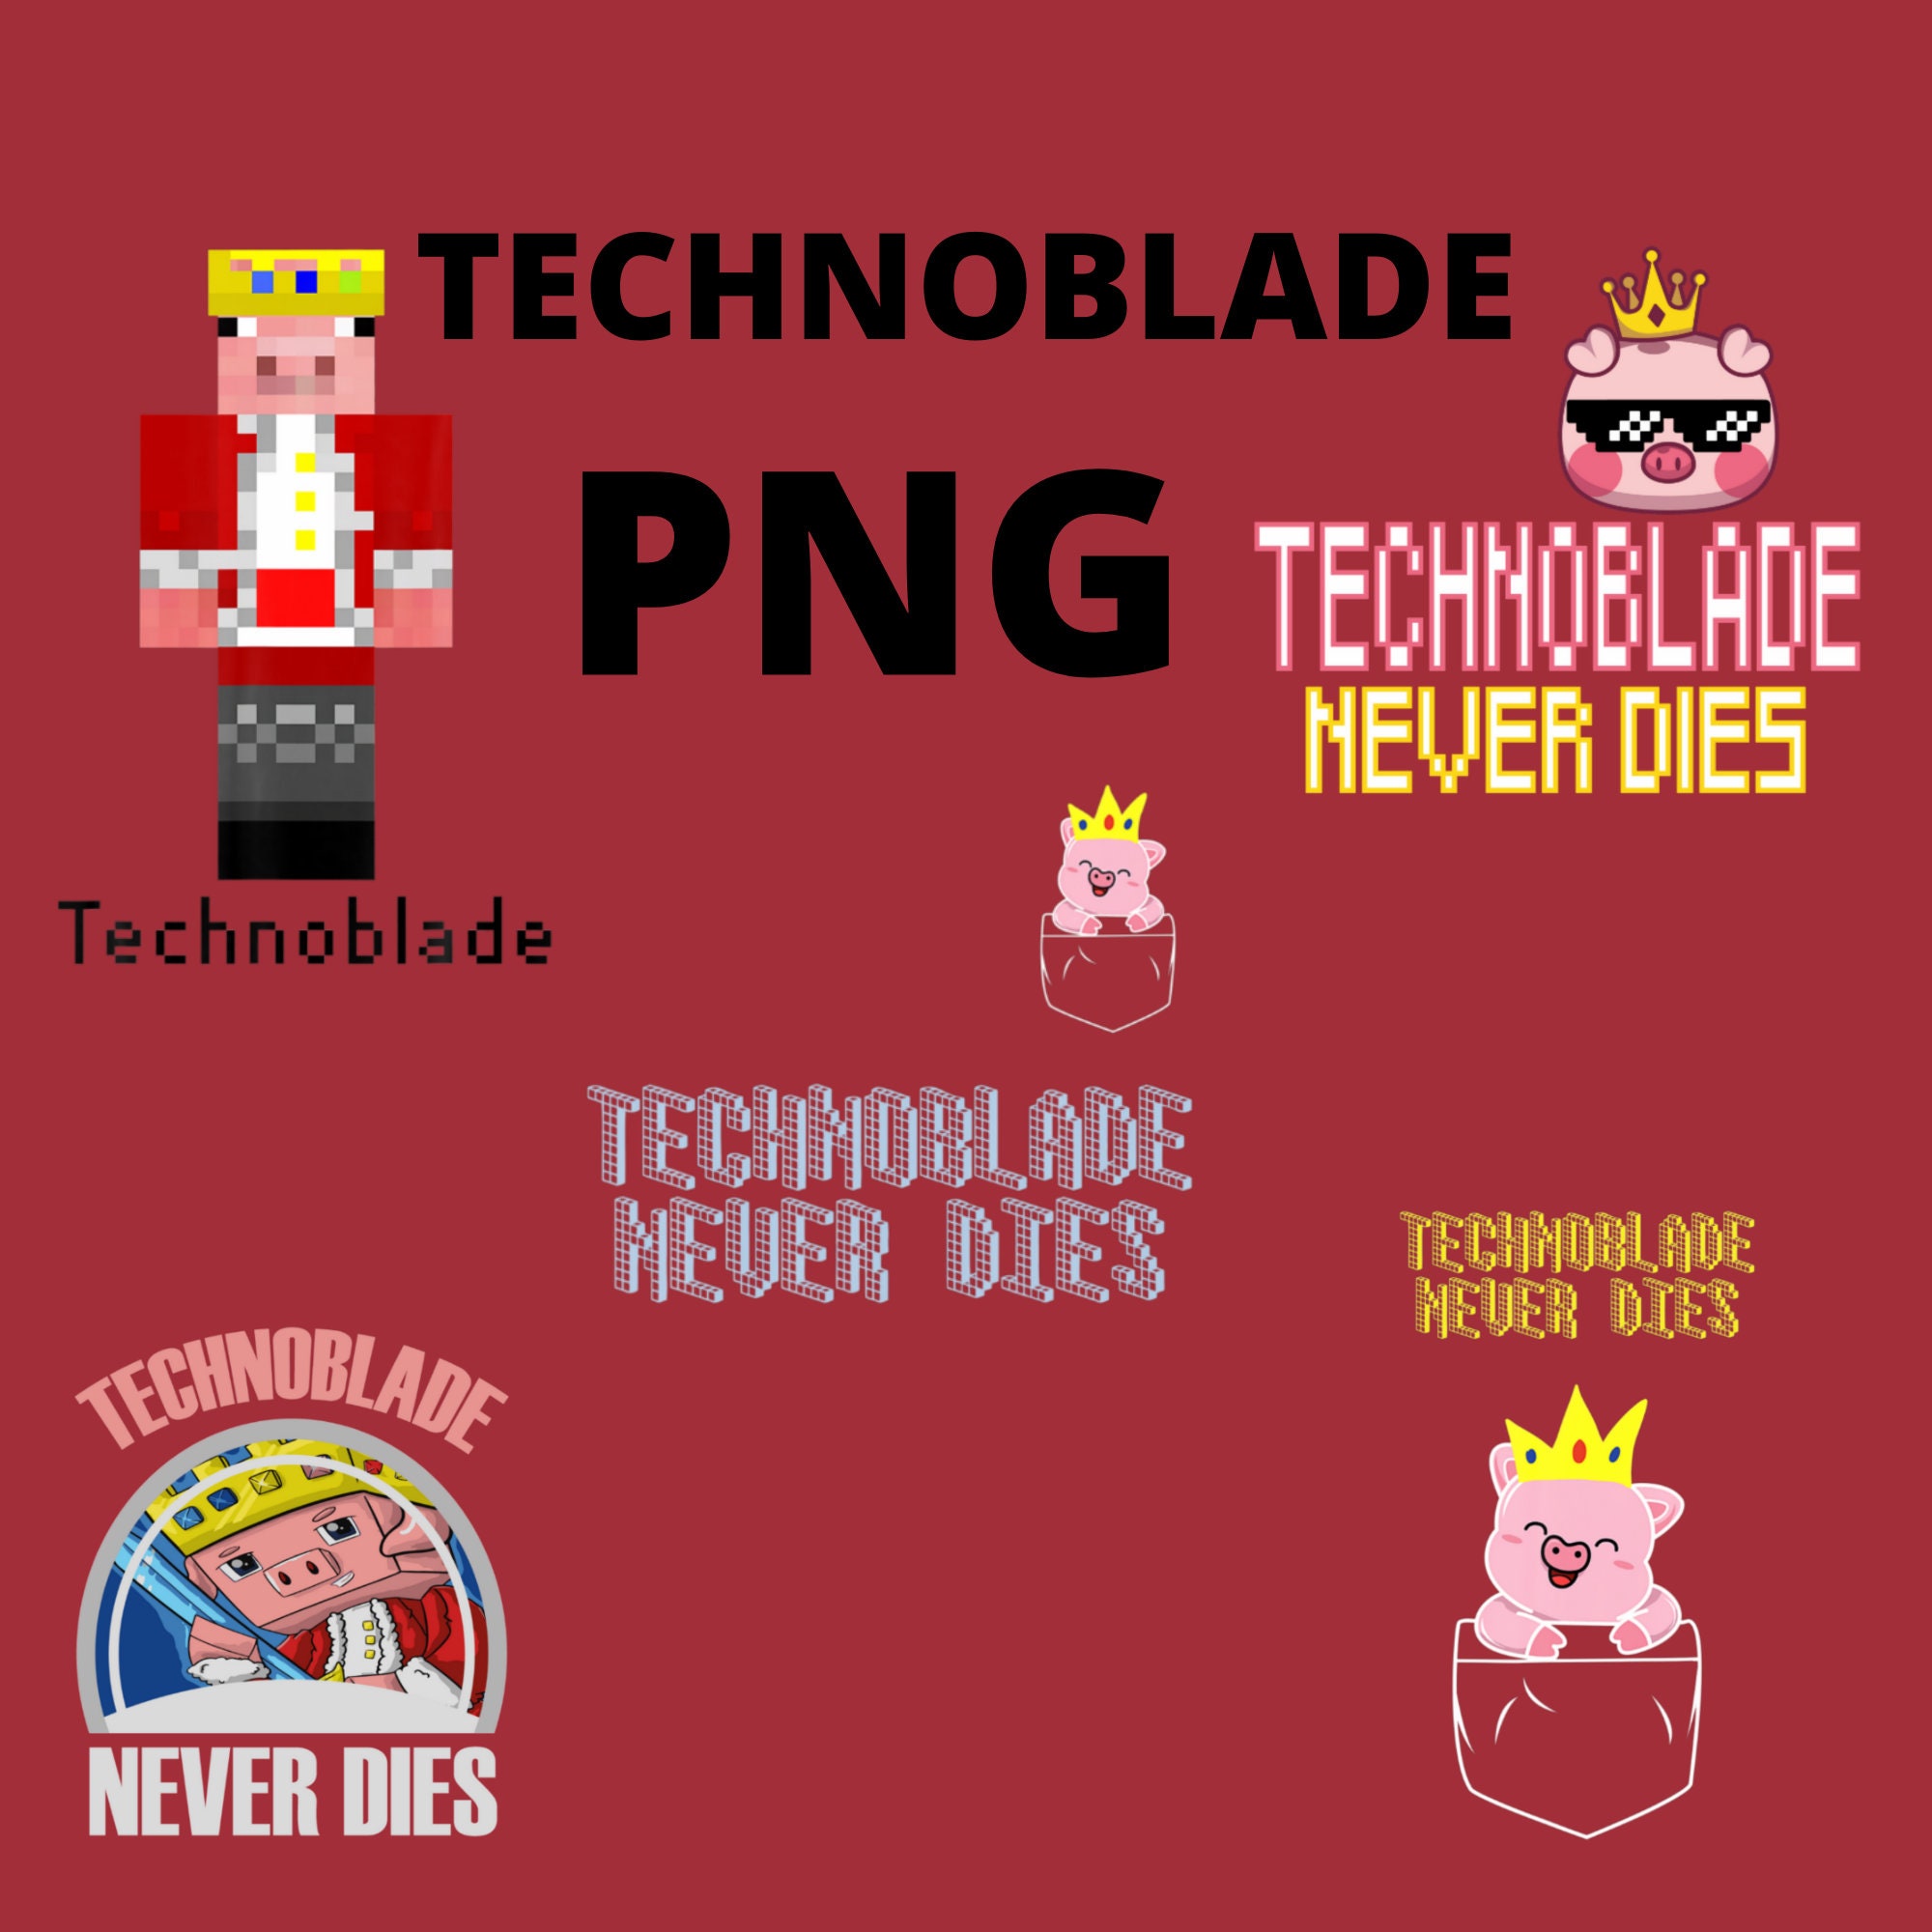 Technoblade Never Dies technoblade Png Technoblade rs